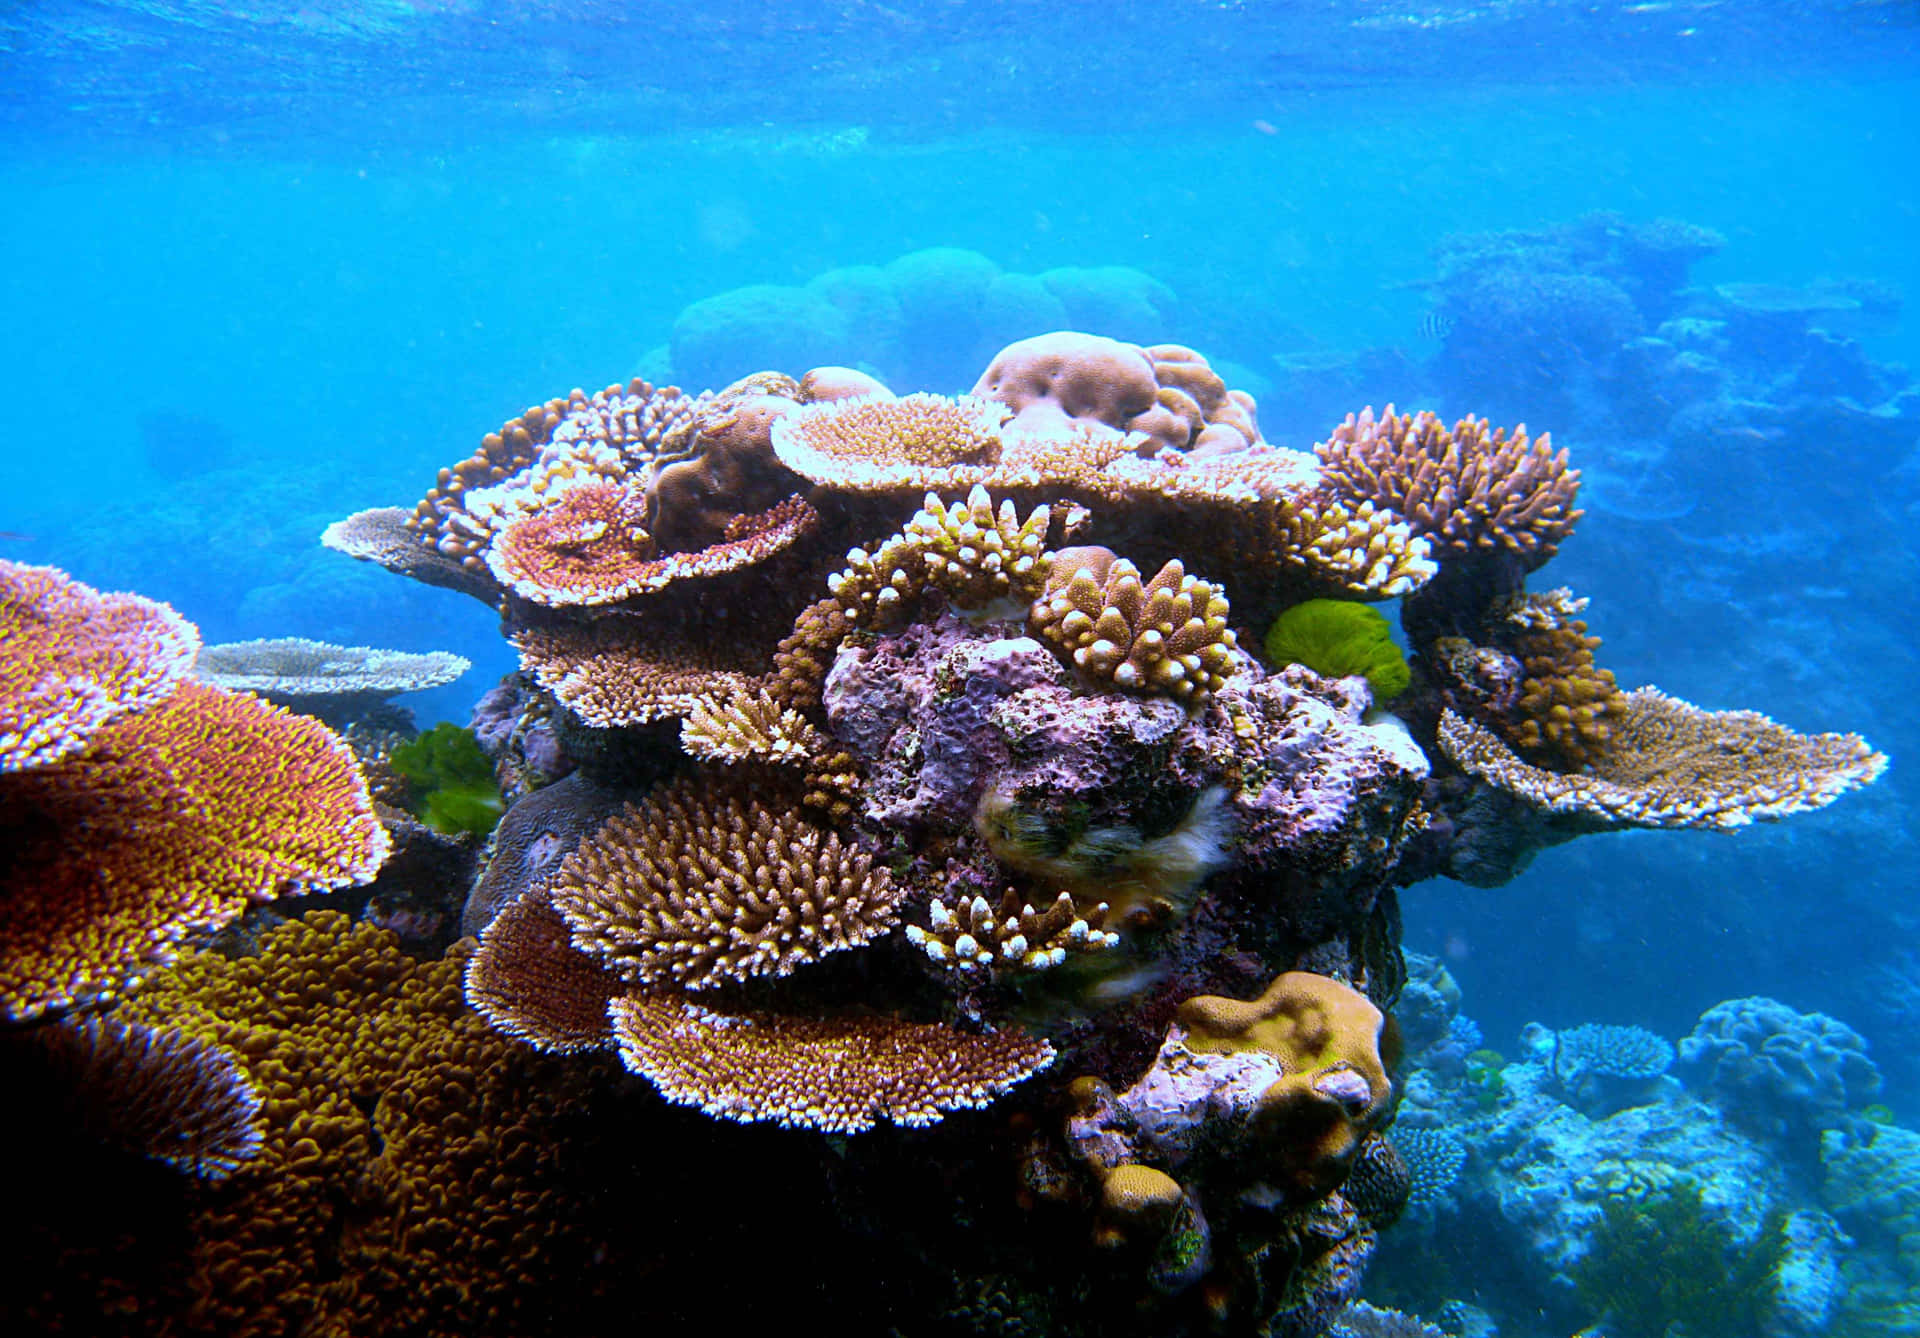 Explore the beauty of coral reefs